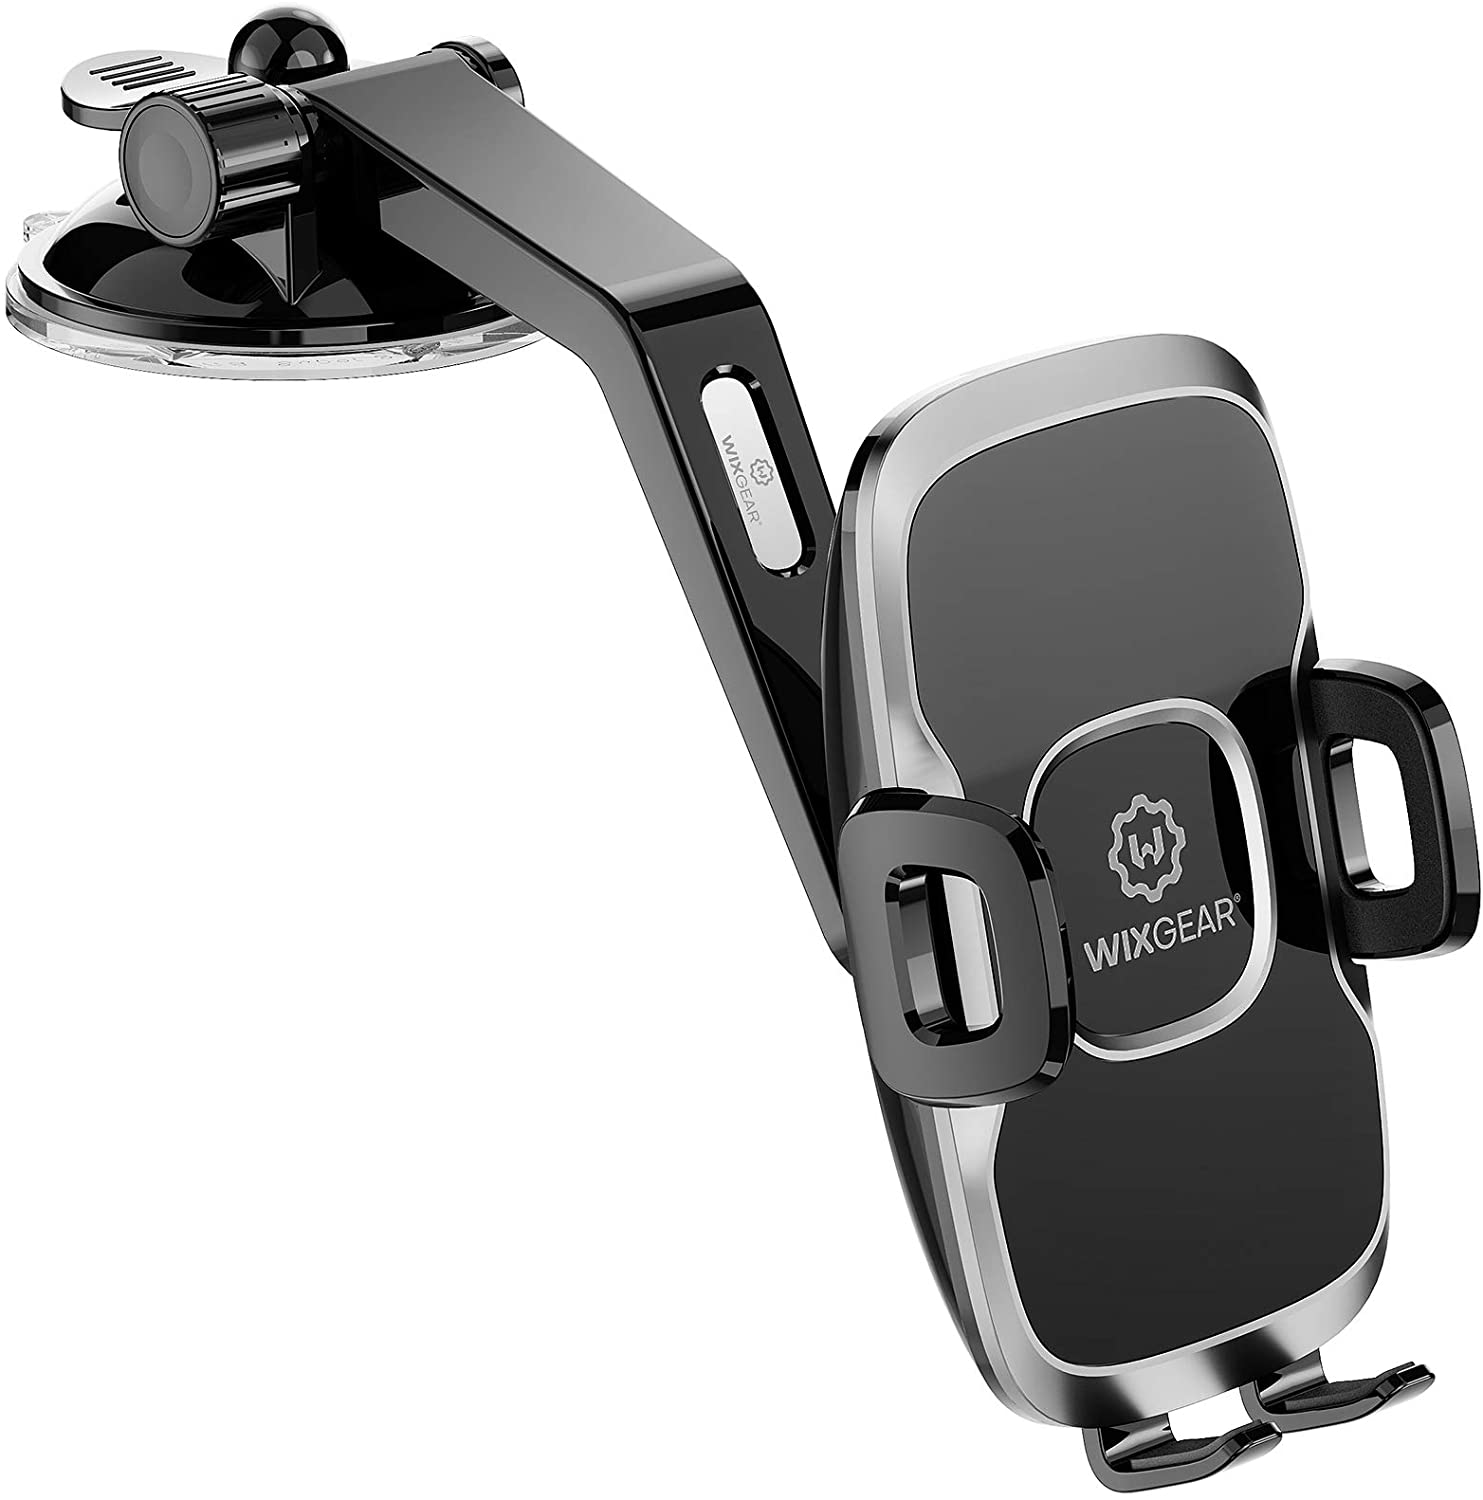 Wixgear Universal Dashboard Curved Phone Car Suction Cup Mount Holder for Cell Phone 360 Degree Rotation.